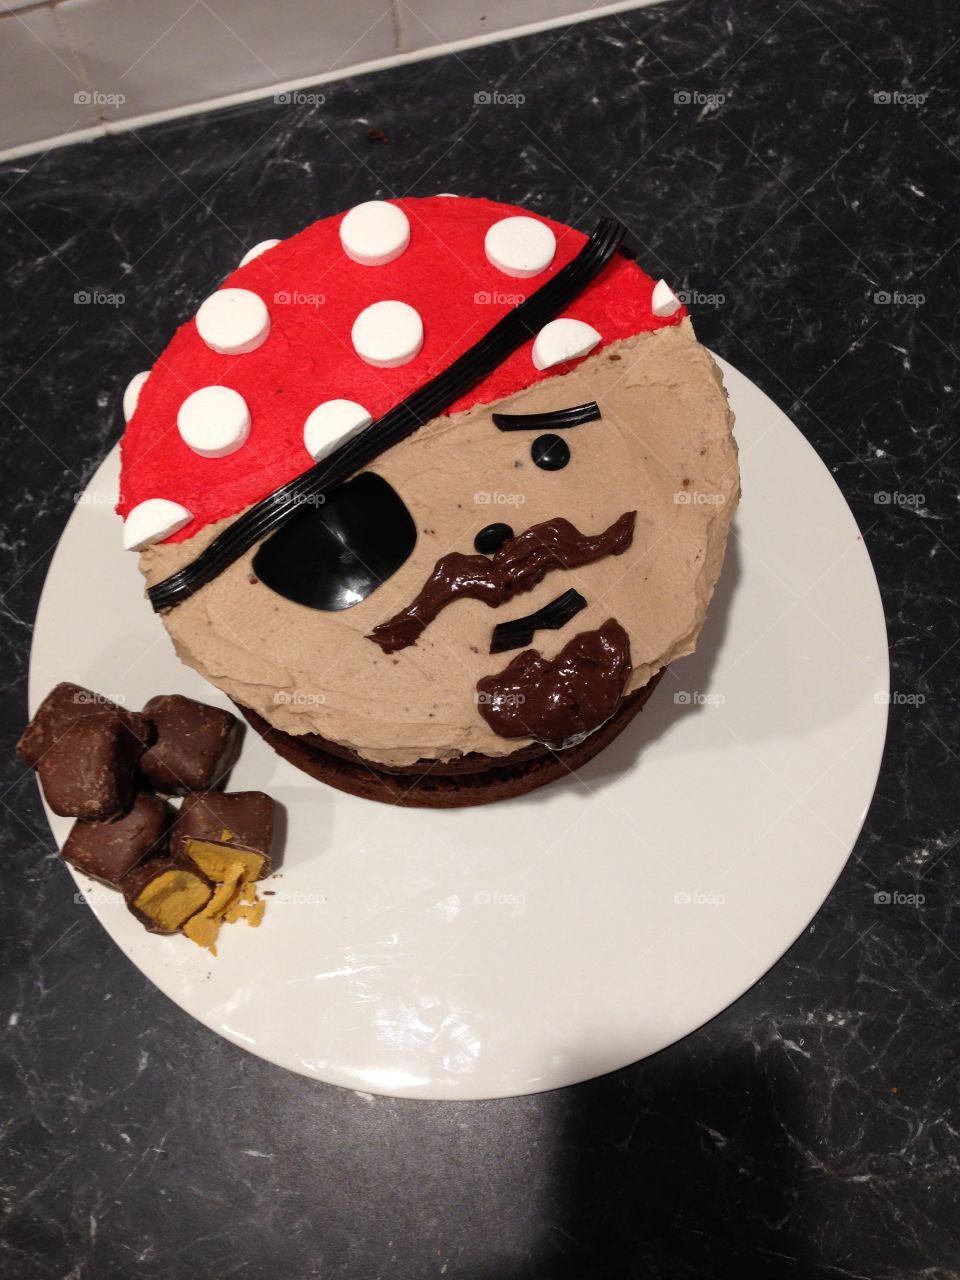 Pirate cake, homemade and delicious.